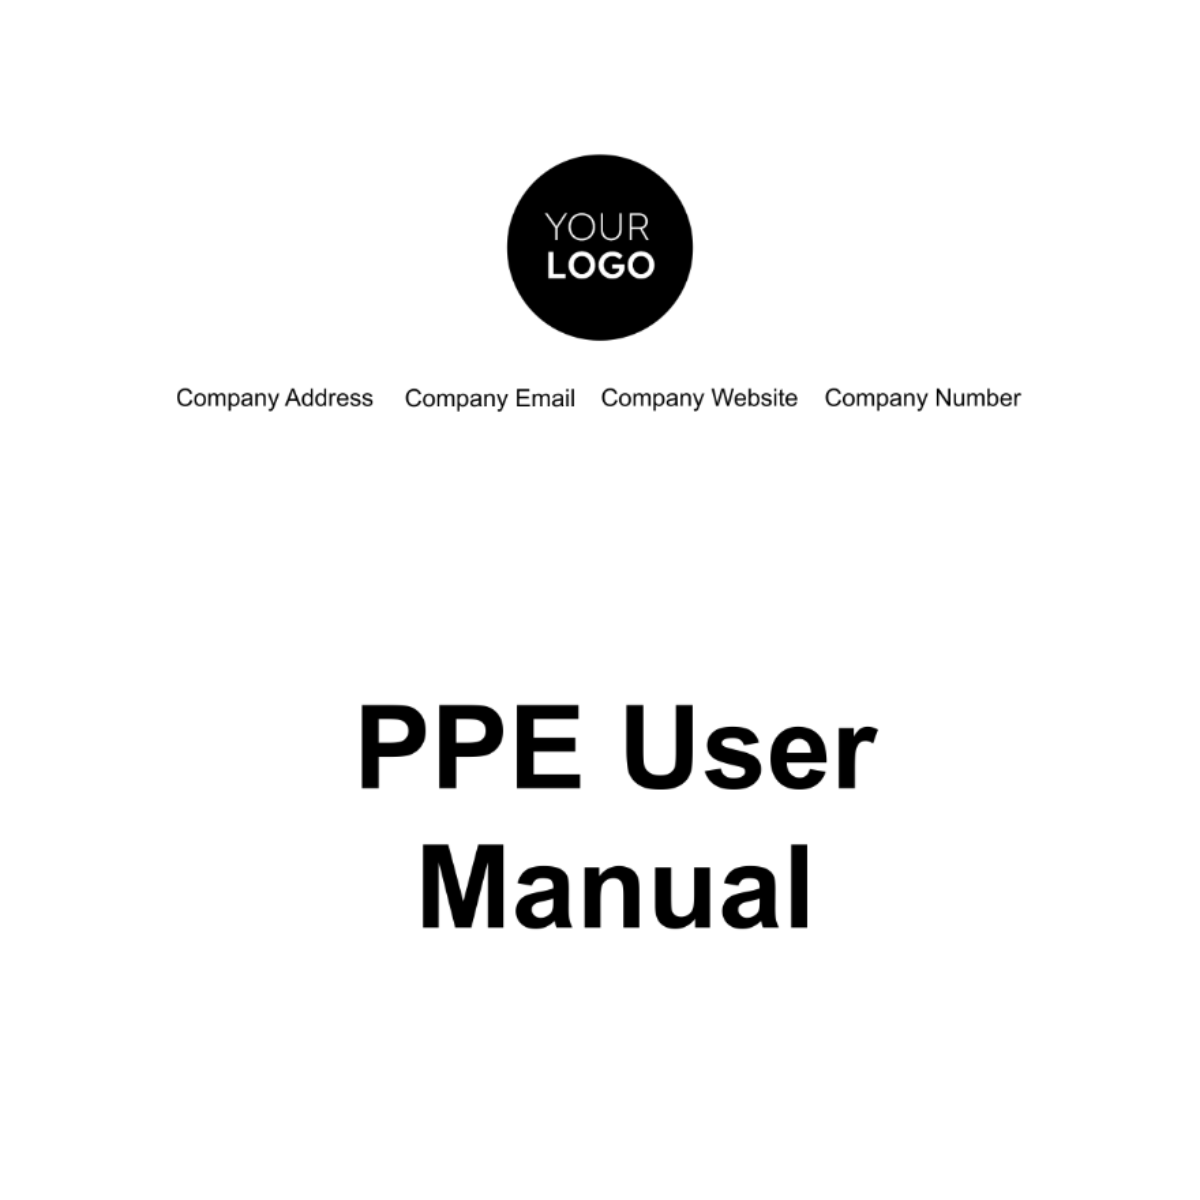 PPE User Manual Template